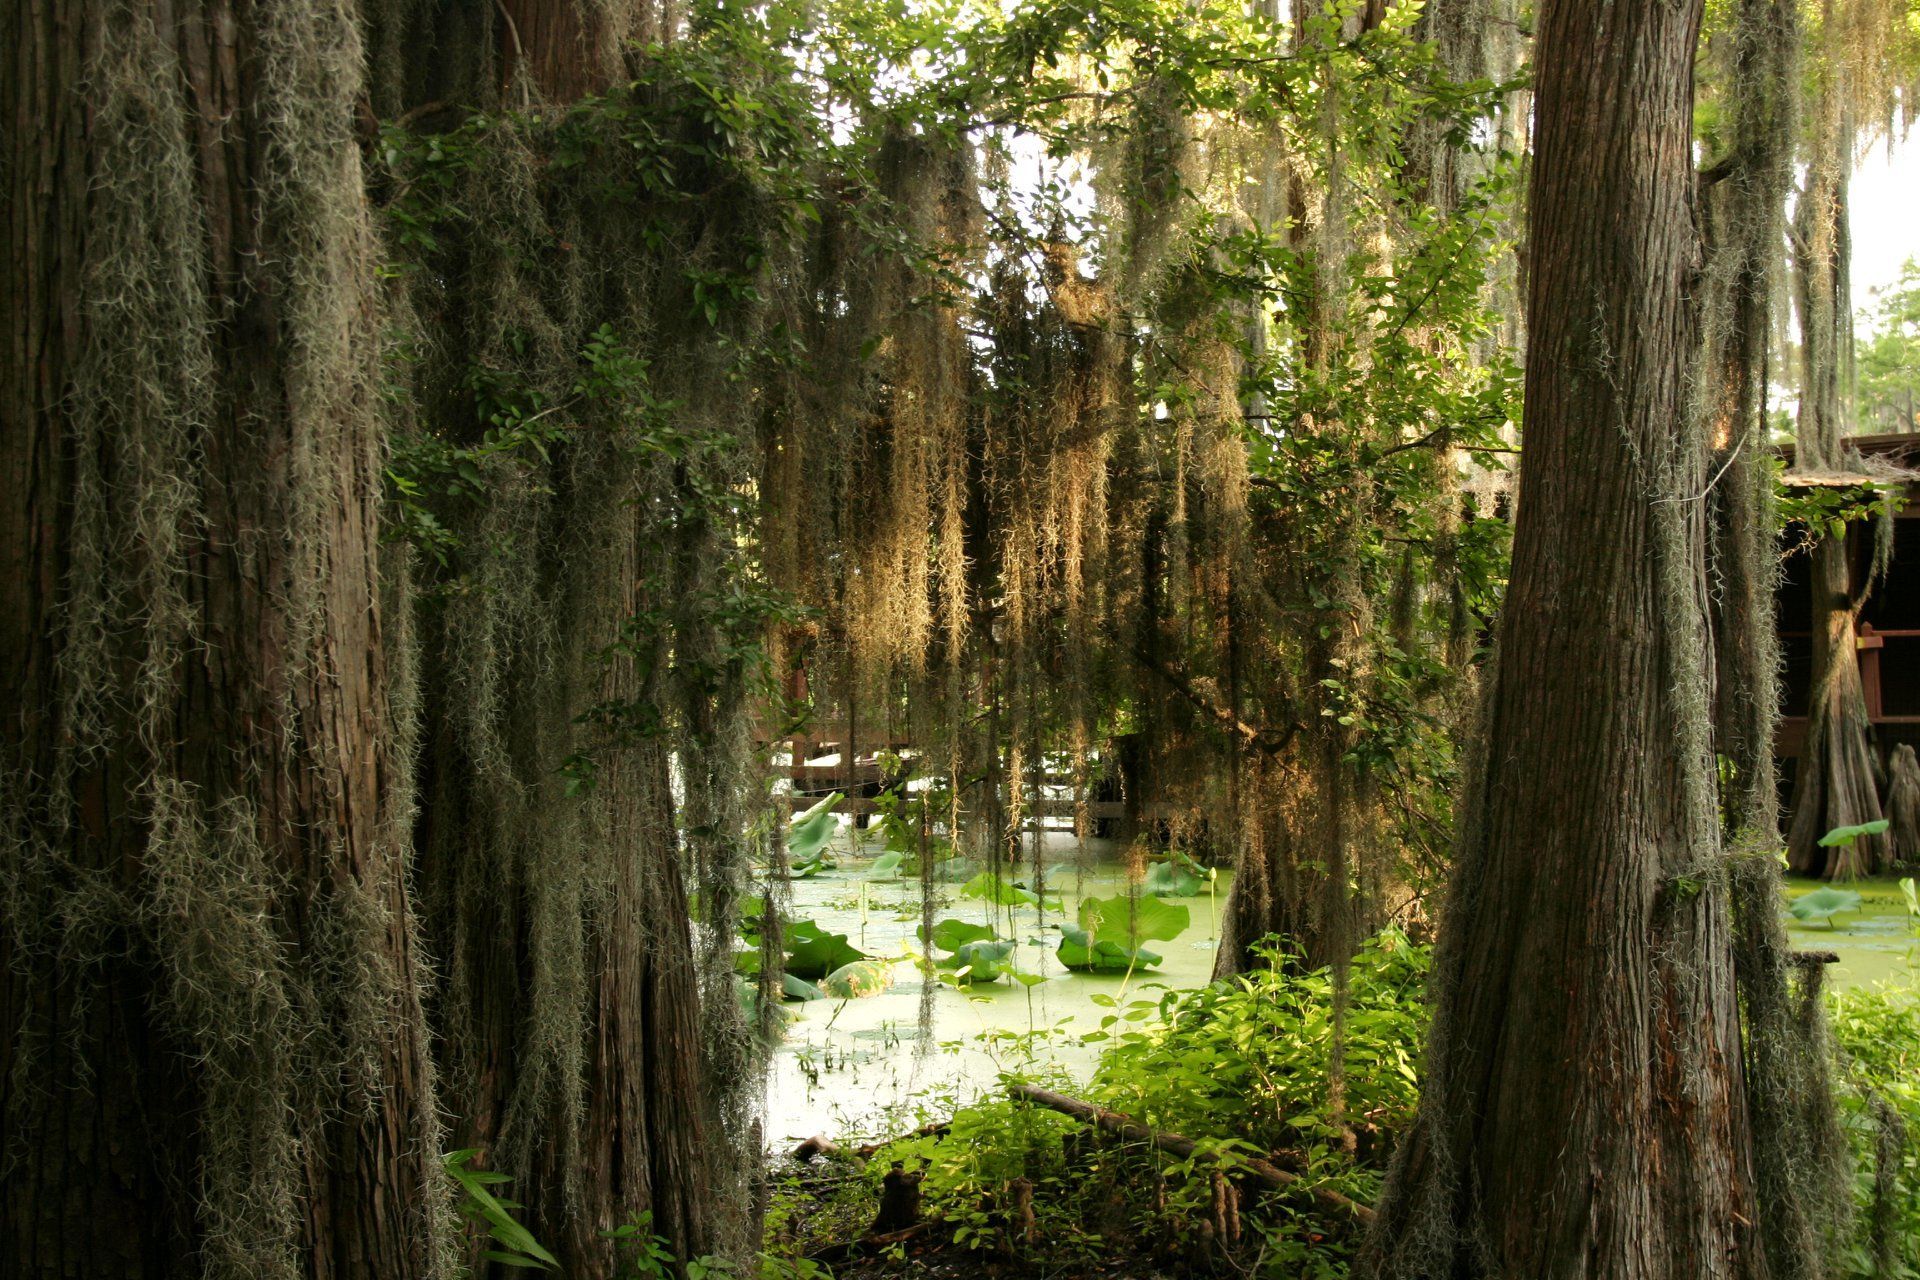 Spanish moss is hanging from the trees in a swamp.